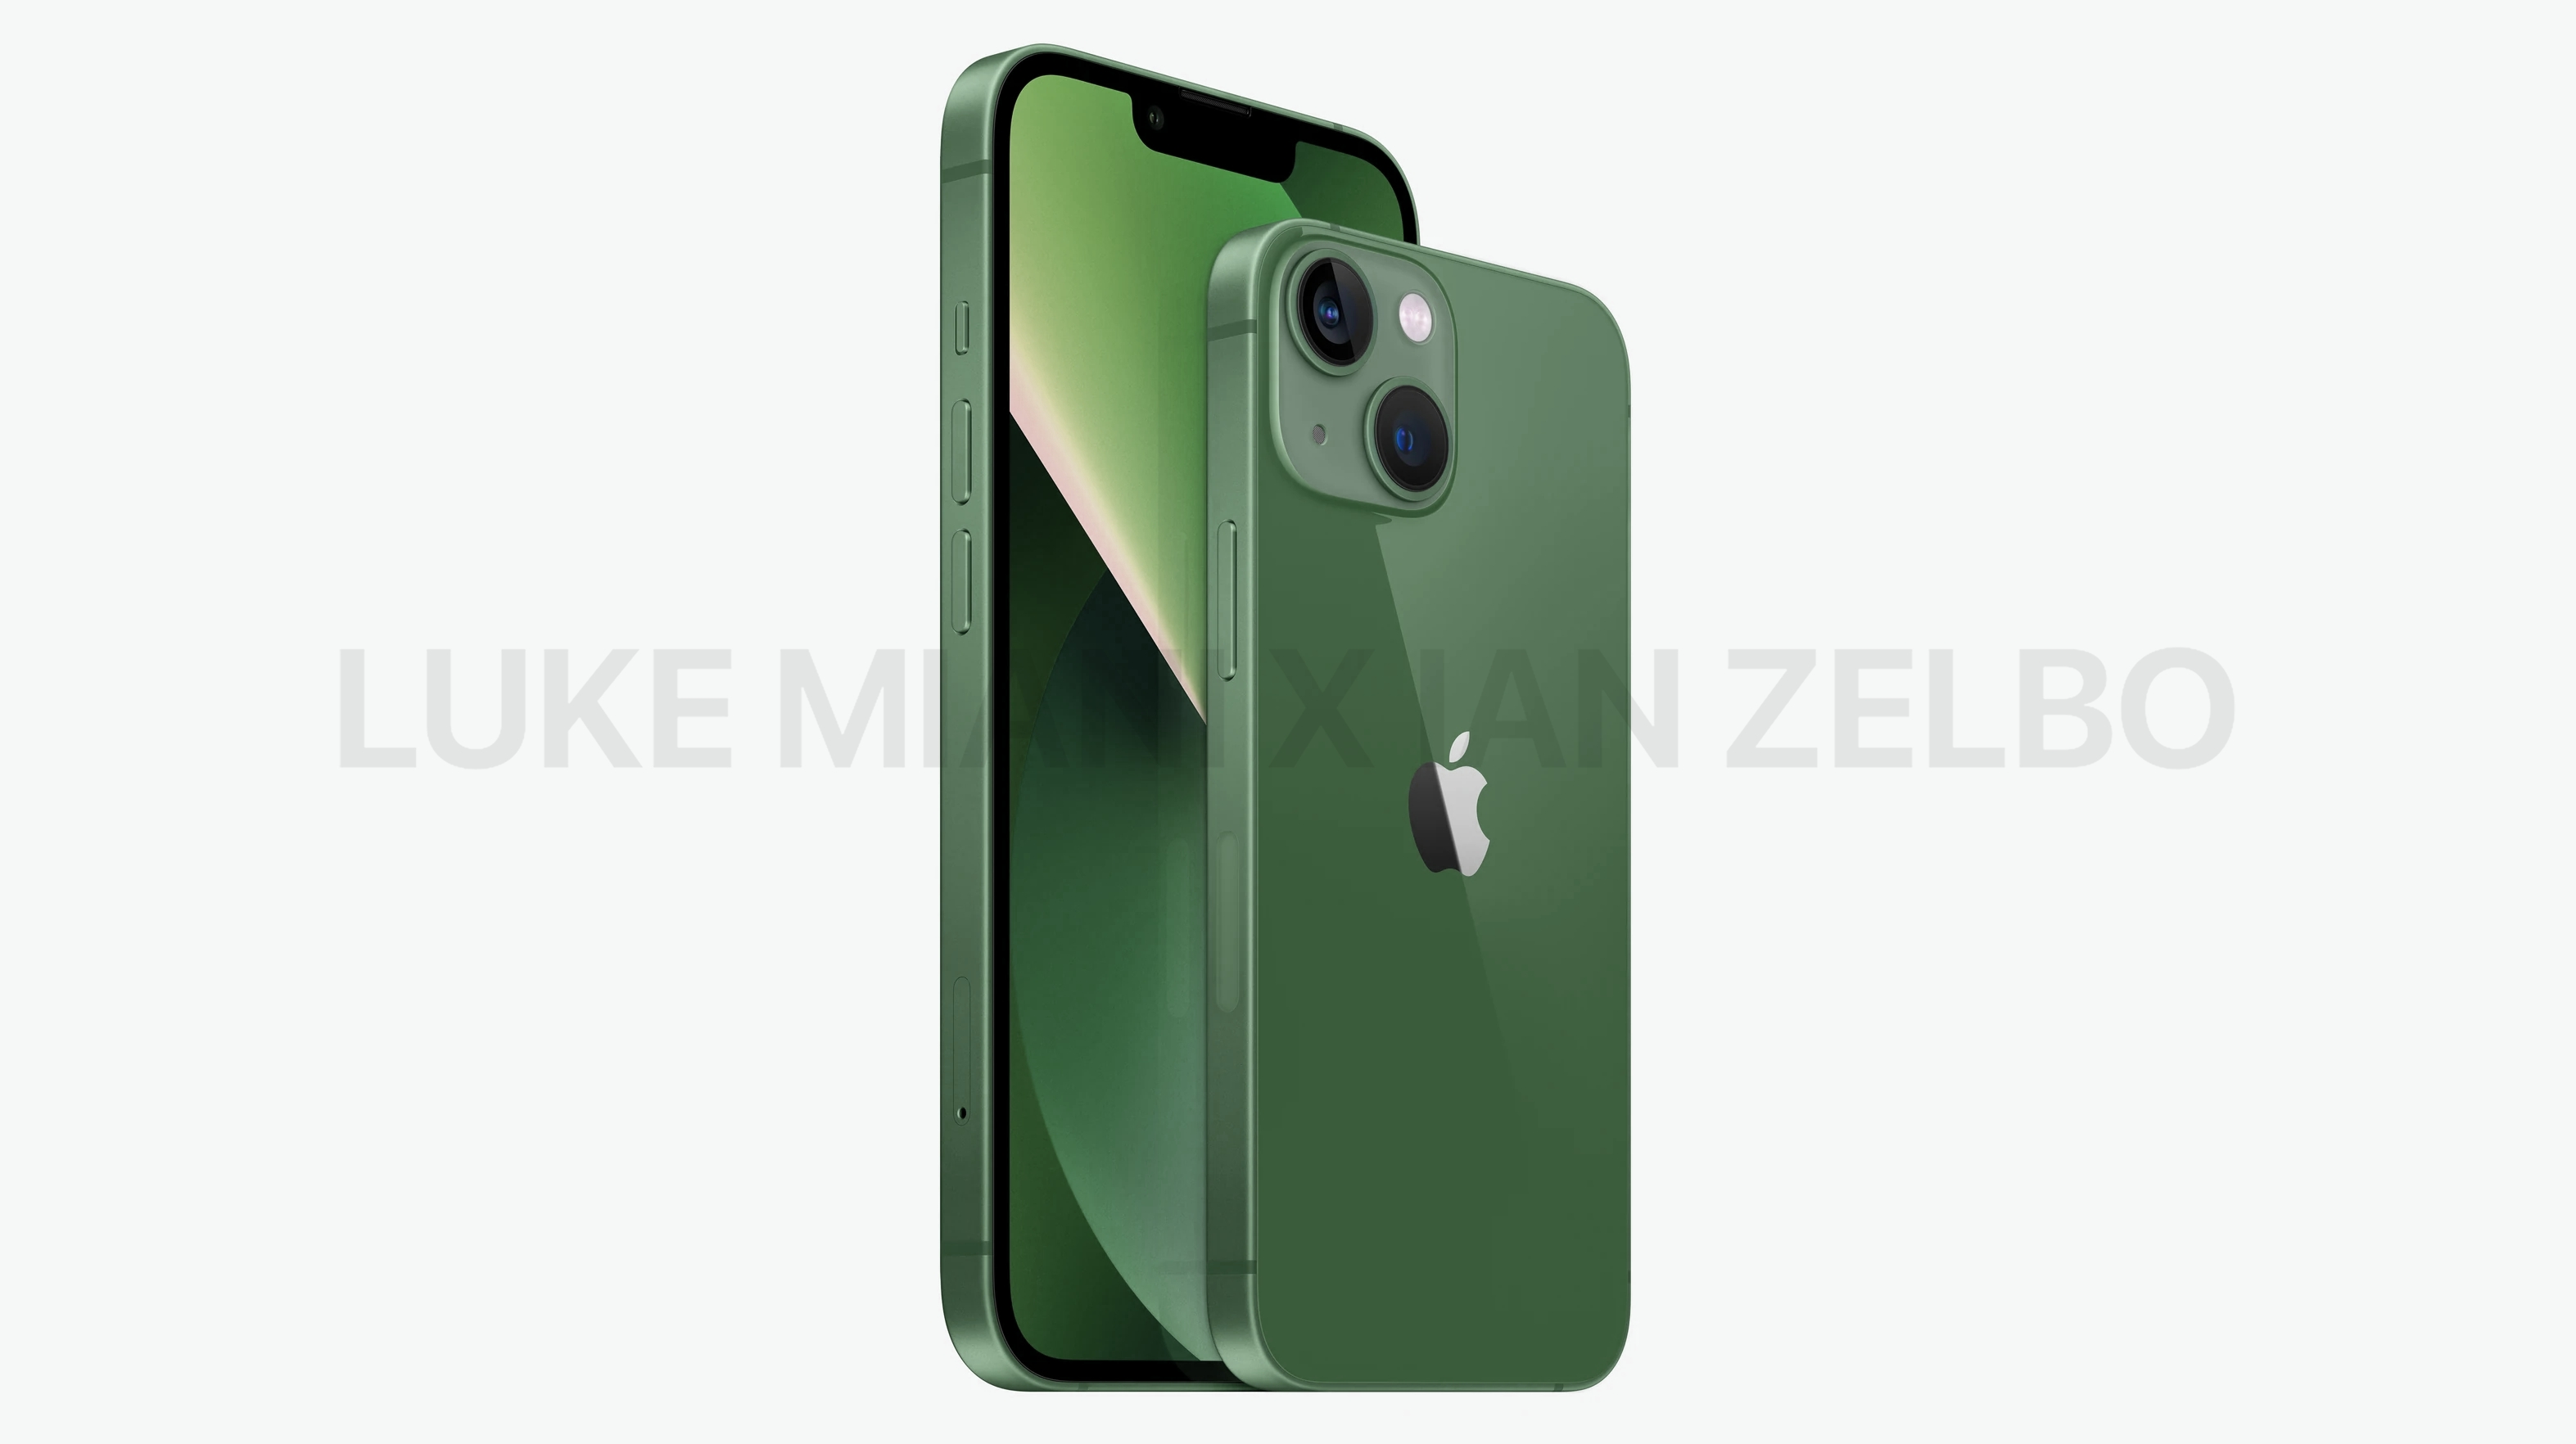 A leaked image of the iPhone 13 in green